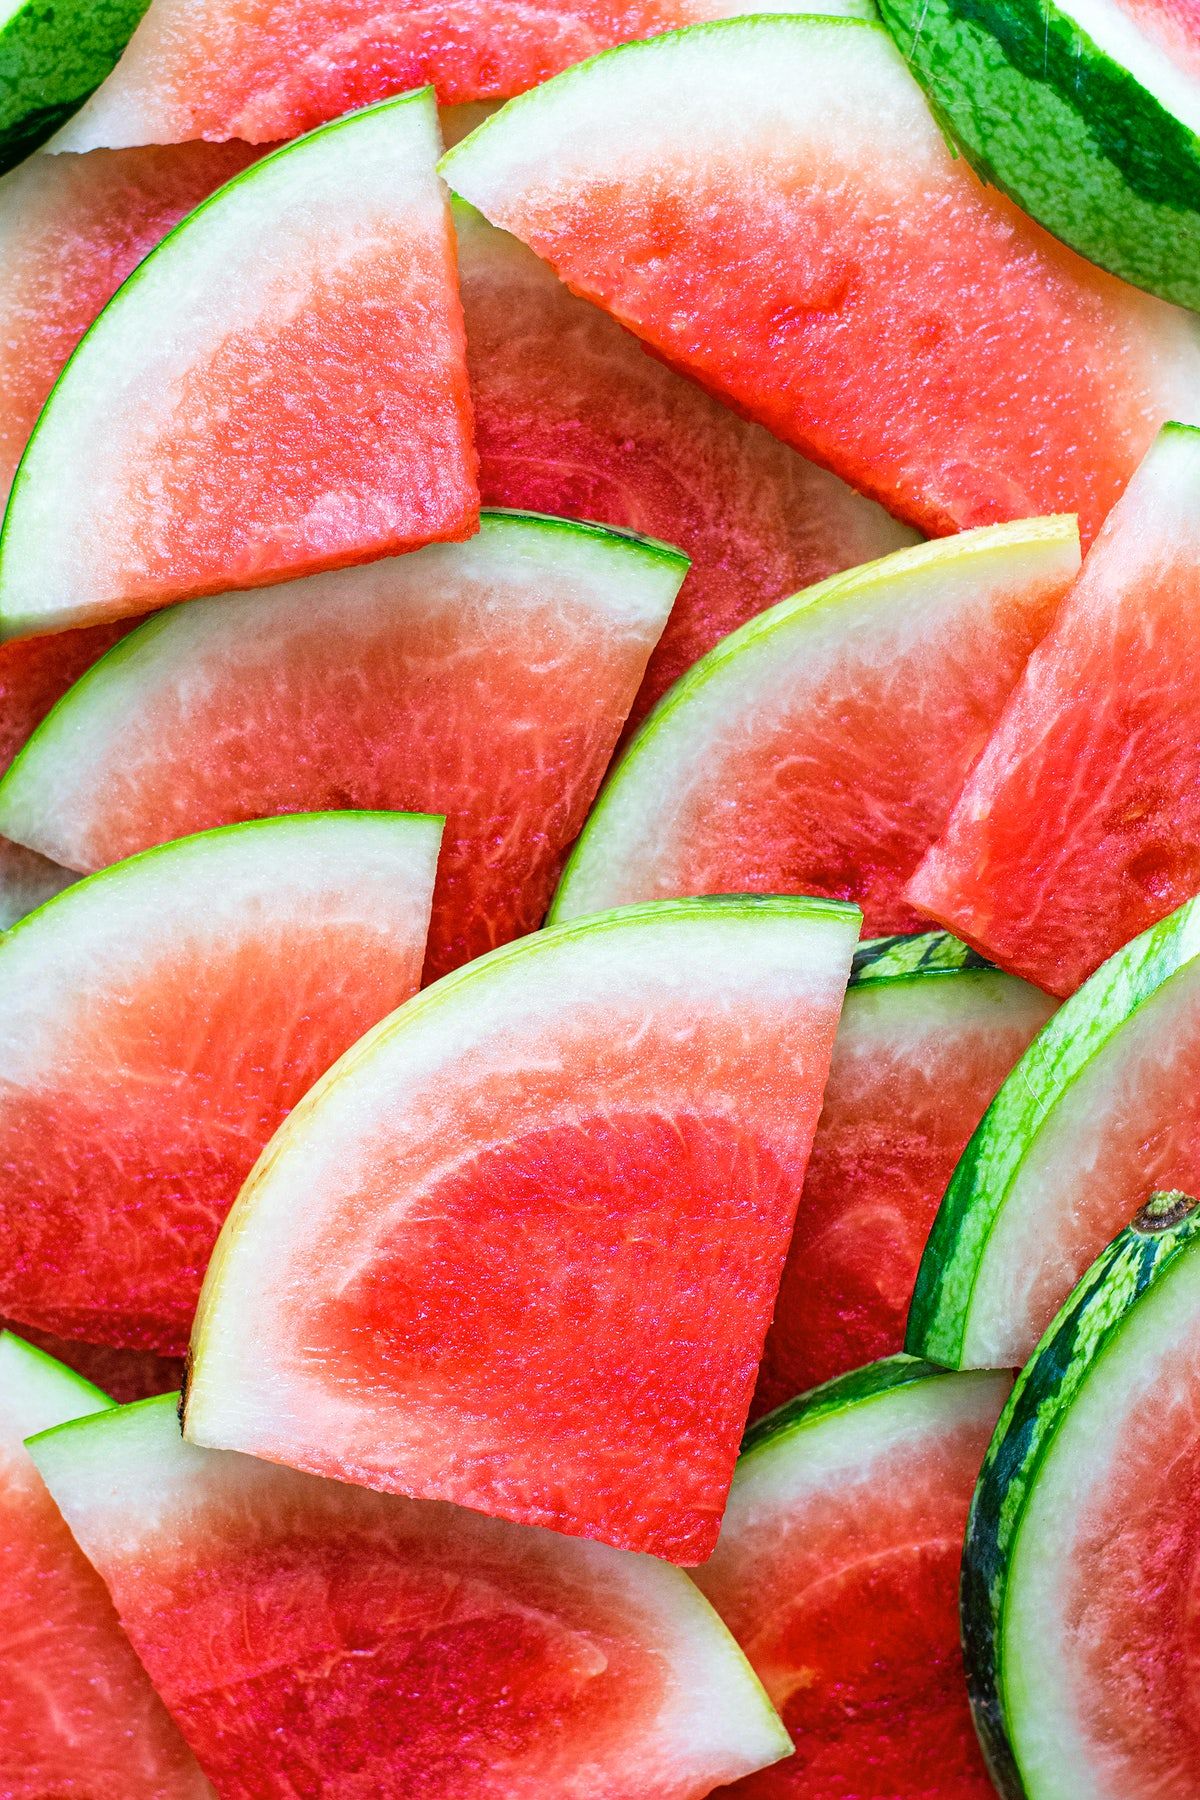 Delicious sliced watermelon wallpaper. Royalty free photo